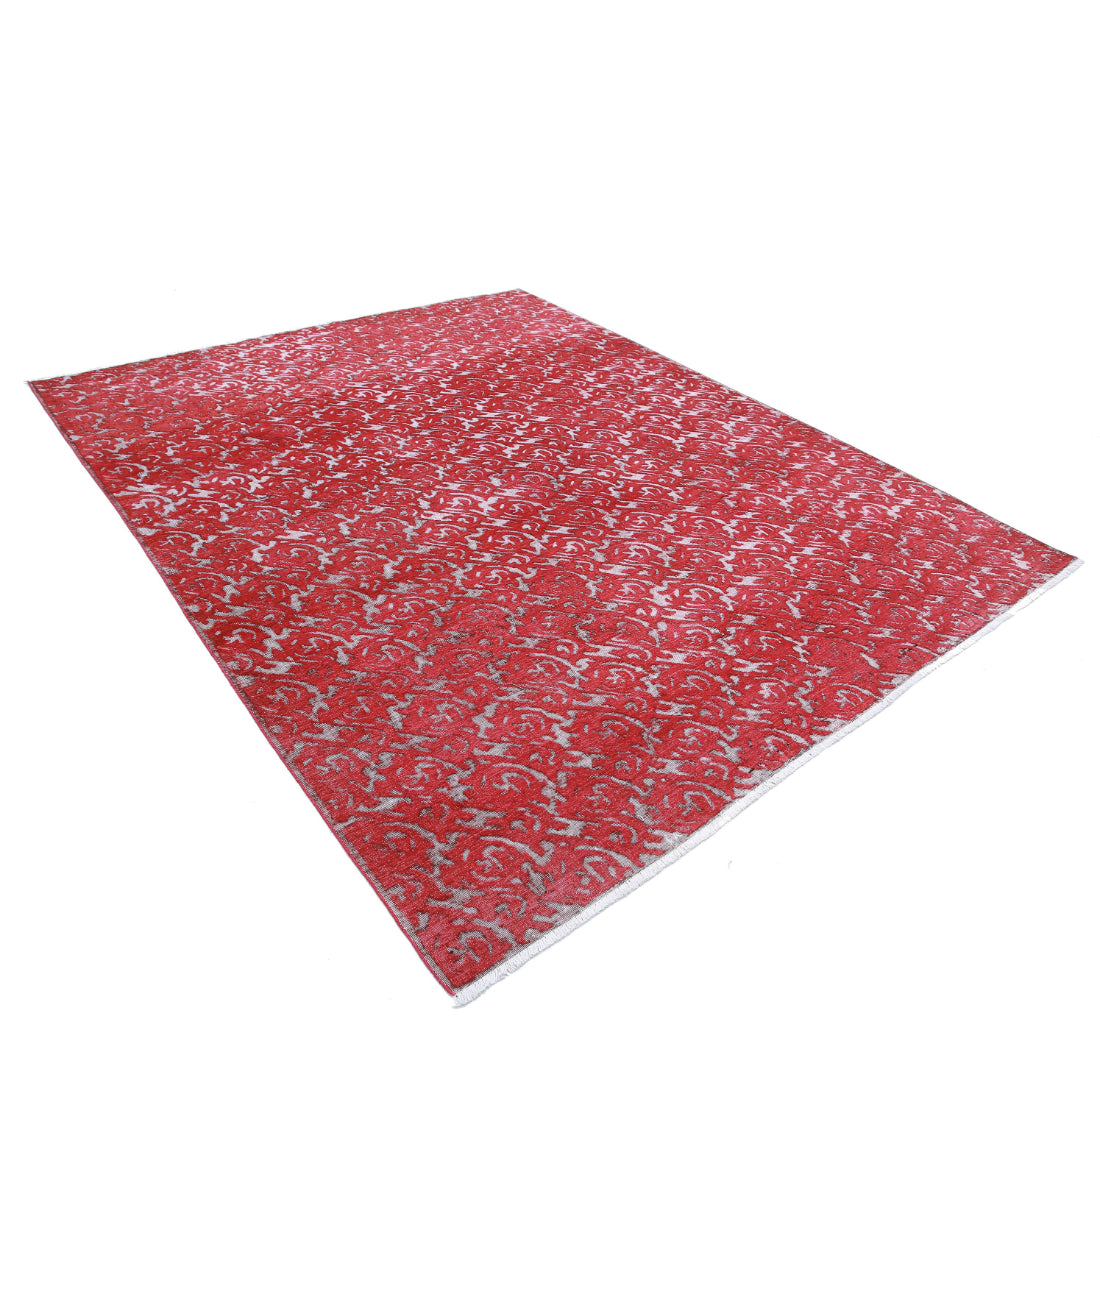 Hand Knotted Onyx Wool Rug - 7'9'' x 9'10'' 7'9'' x 9'10'' (233 X 295) / Red / Red